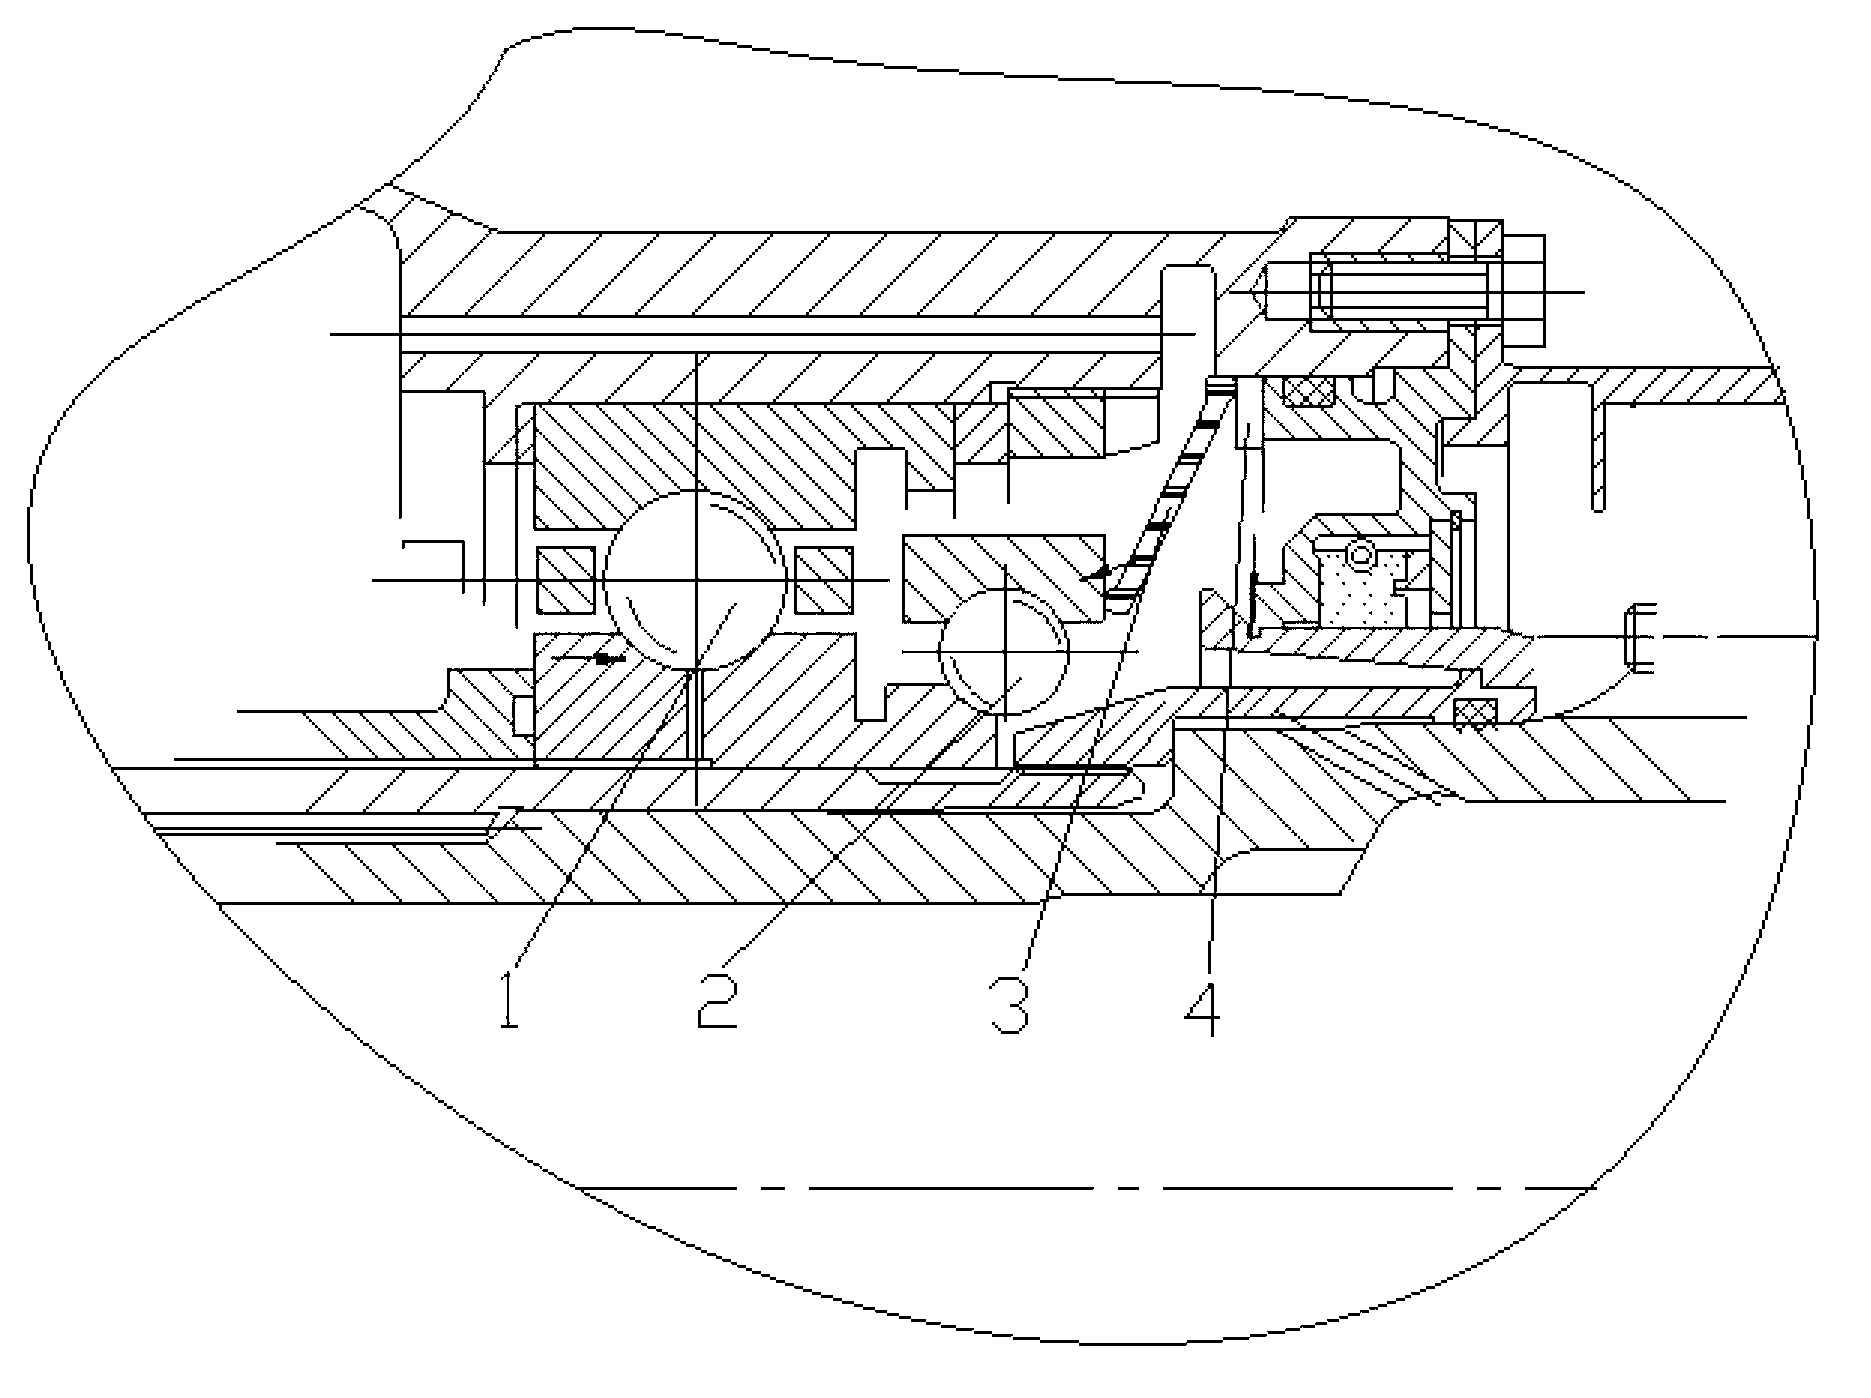 Structure for aviation gas turbine rotor supporting point ball bearing axial pre-load